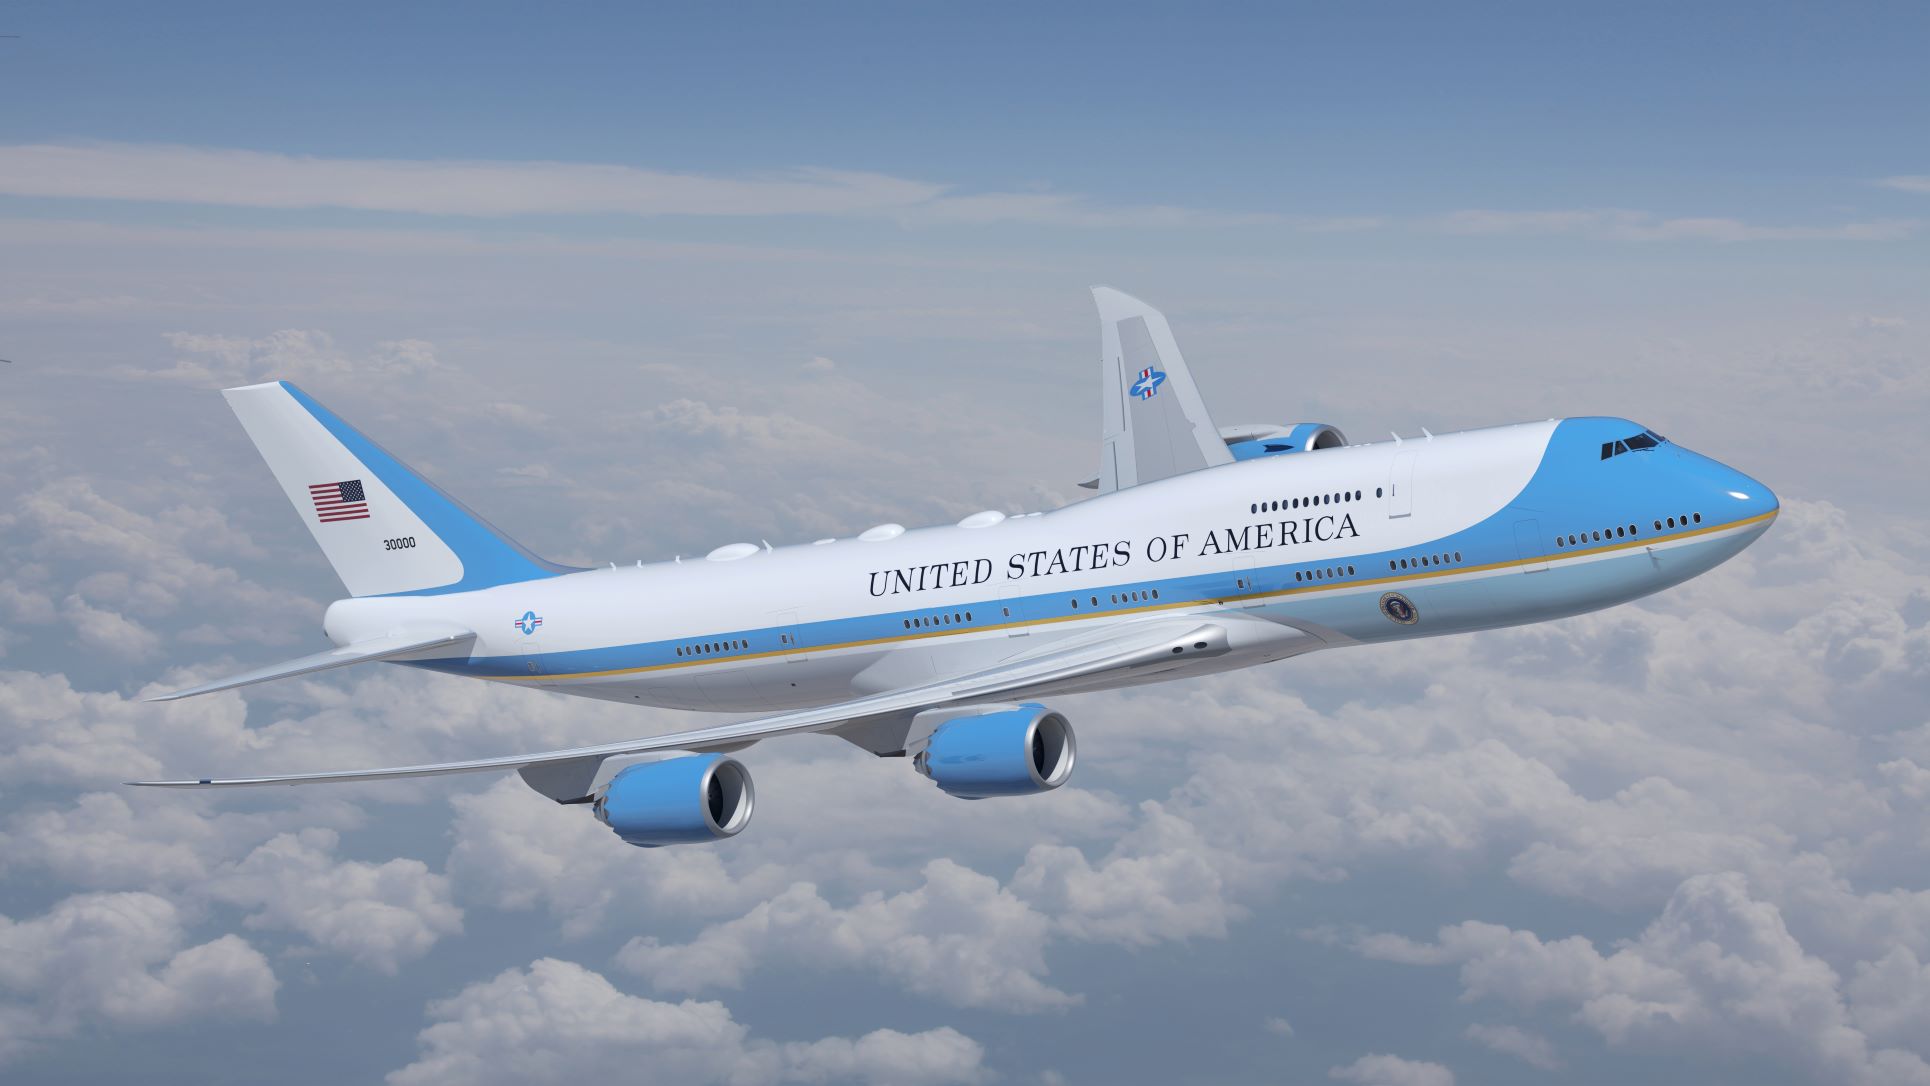 Boeing risks missing Air Force One 2024 deadline due to legal